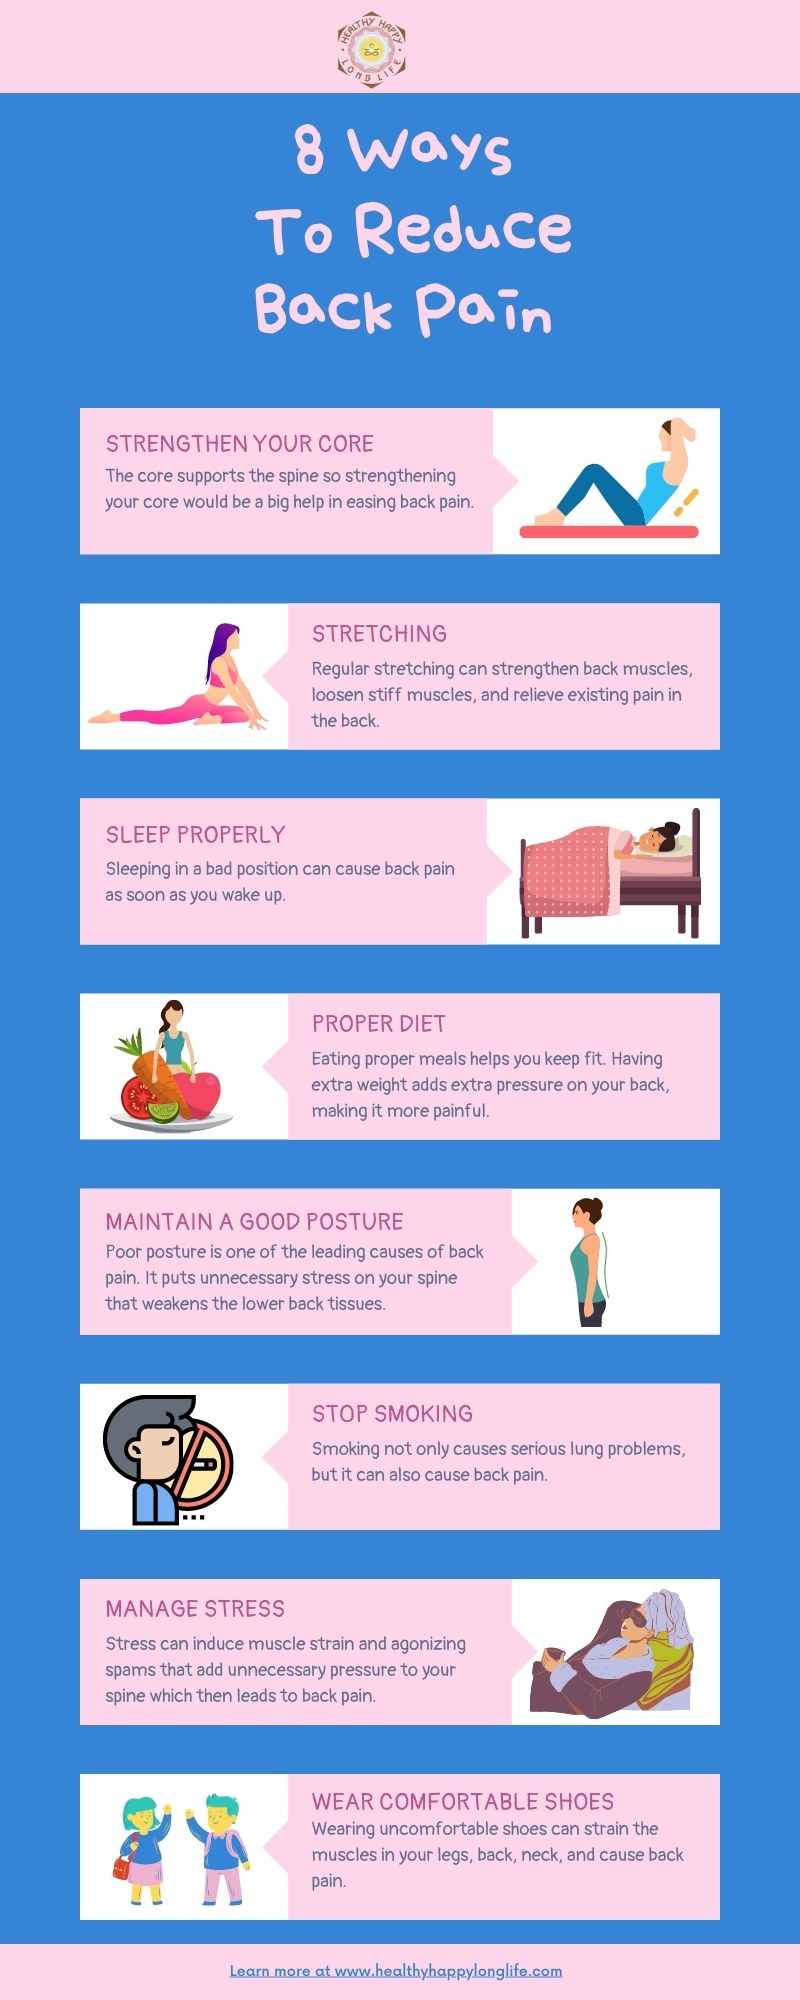 8 tips to help ease your back pain